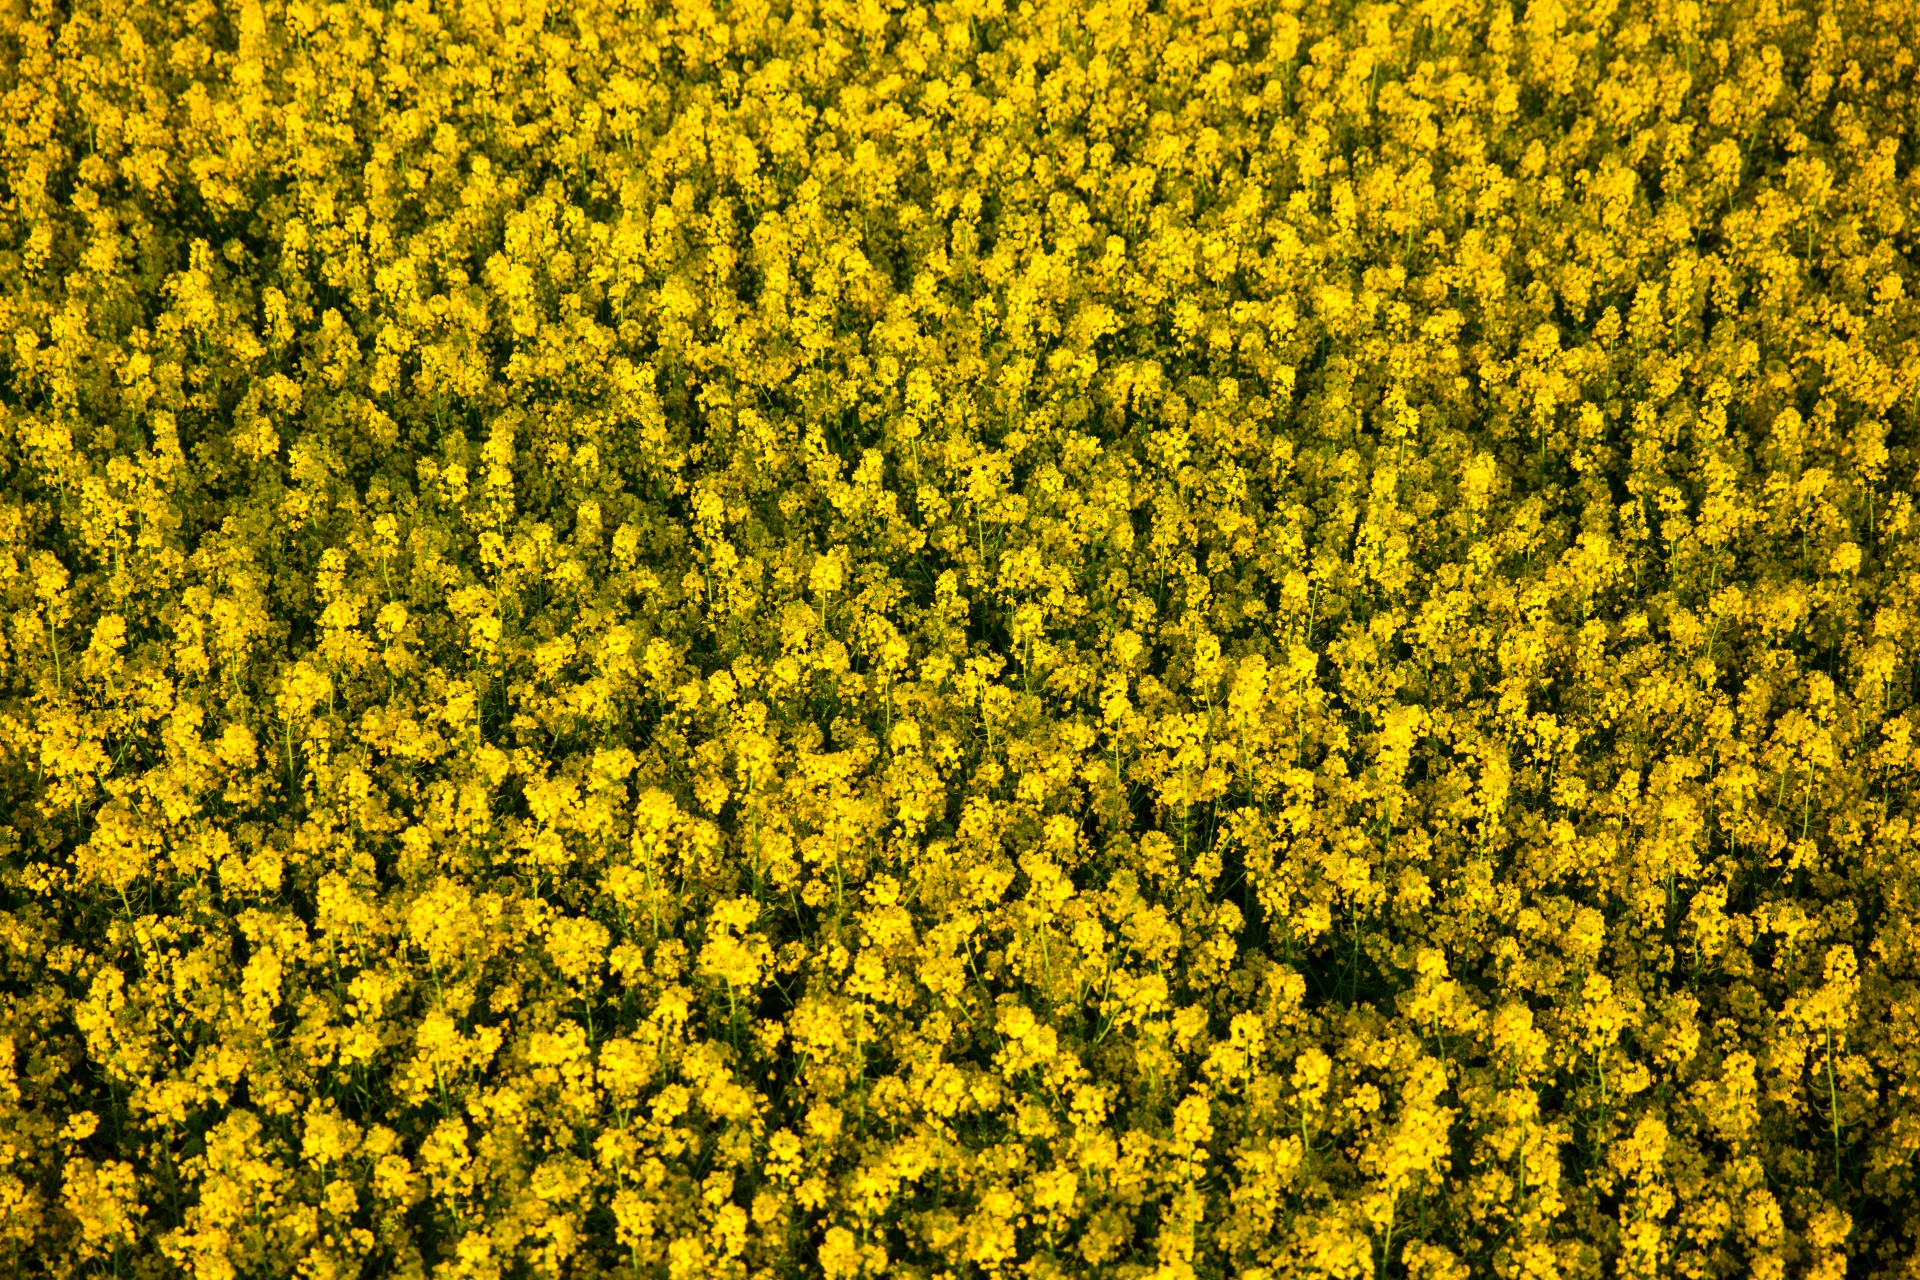 Rapeseed Background